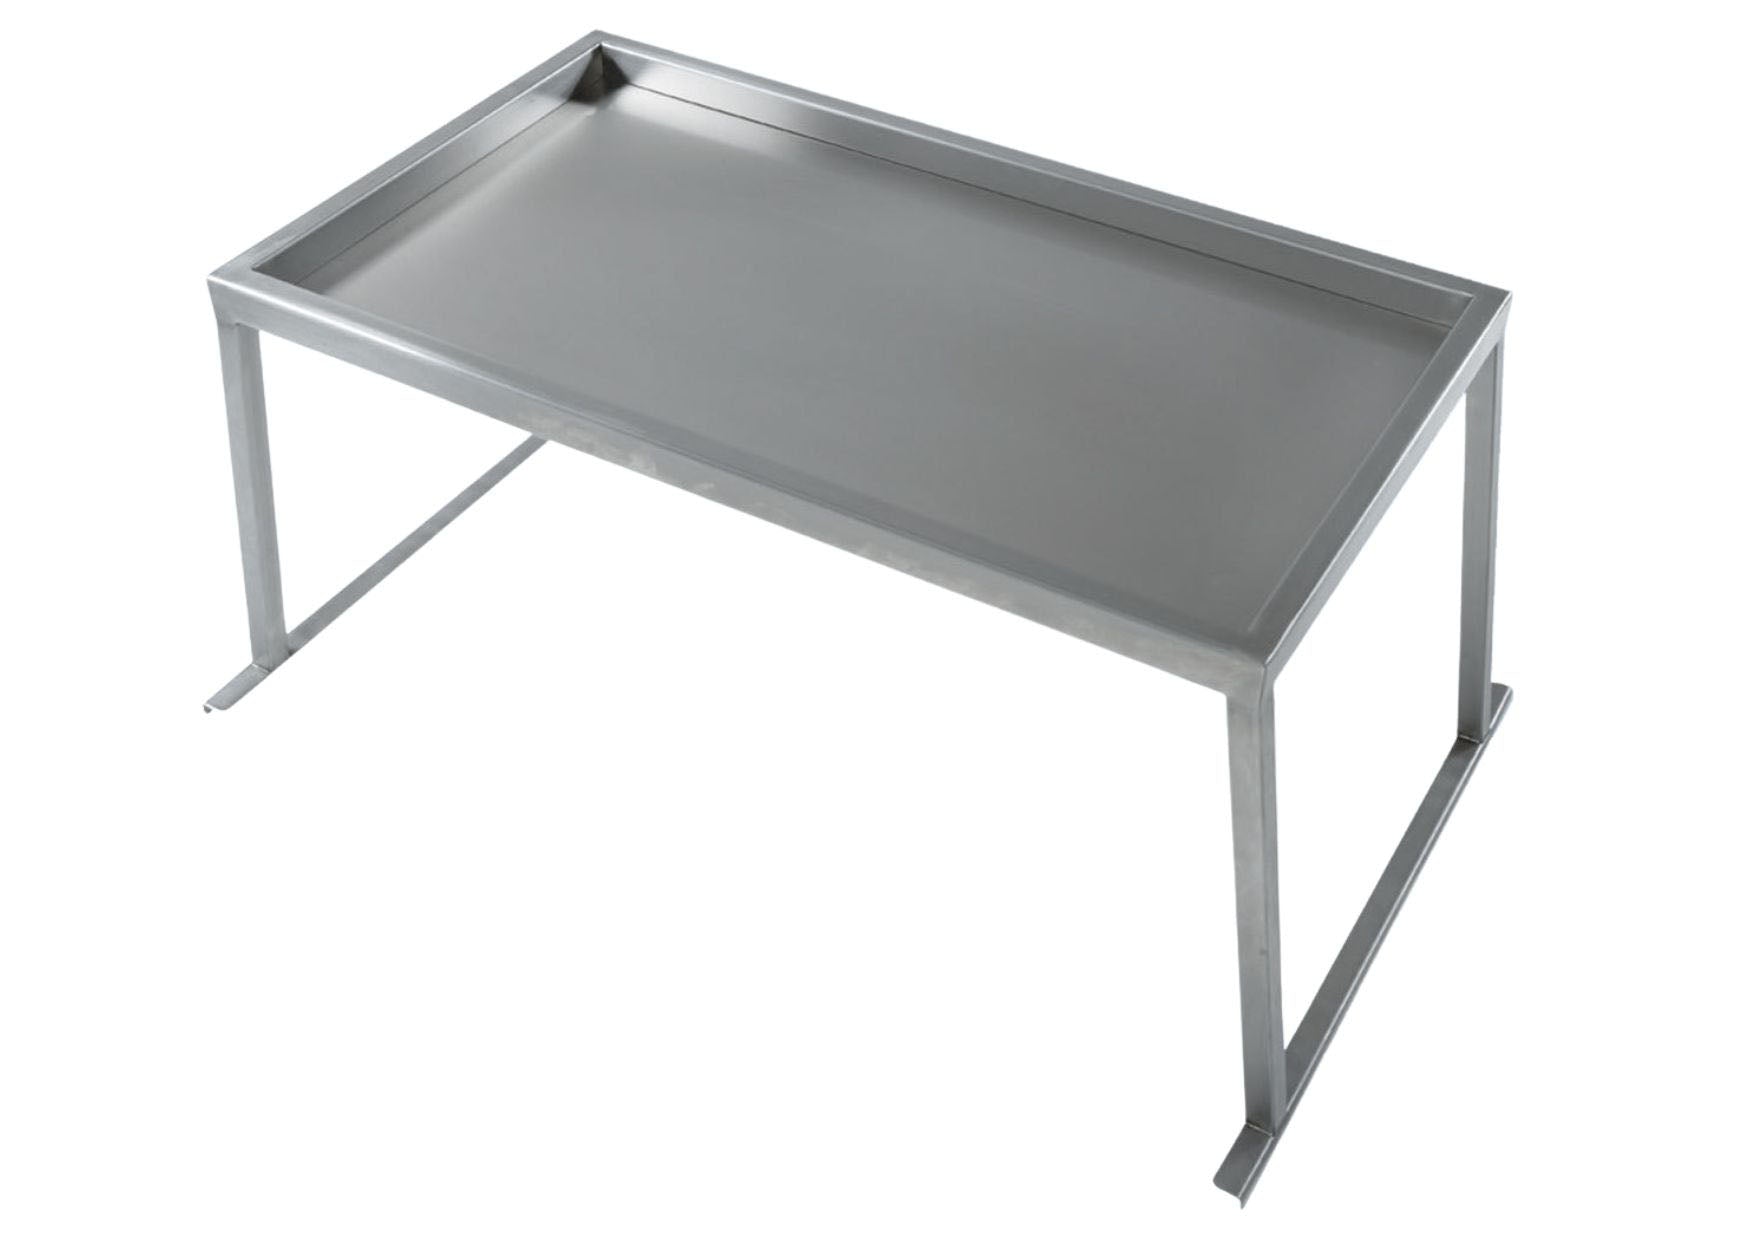 Stainless steel instrument tray